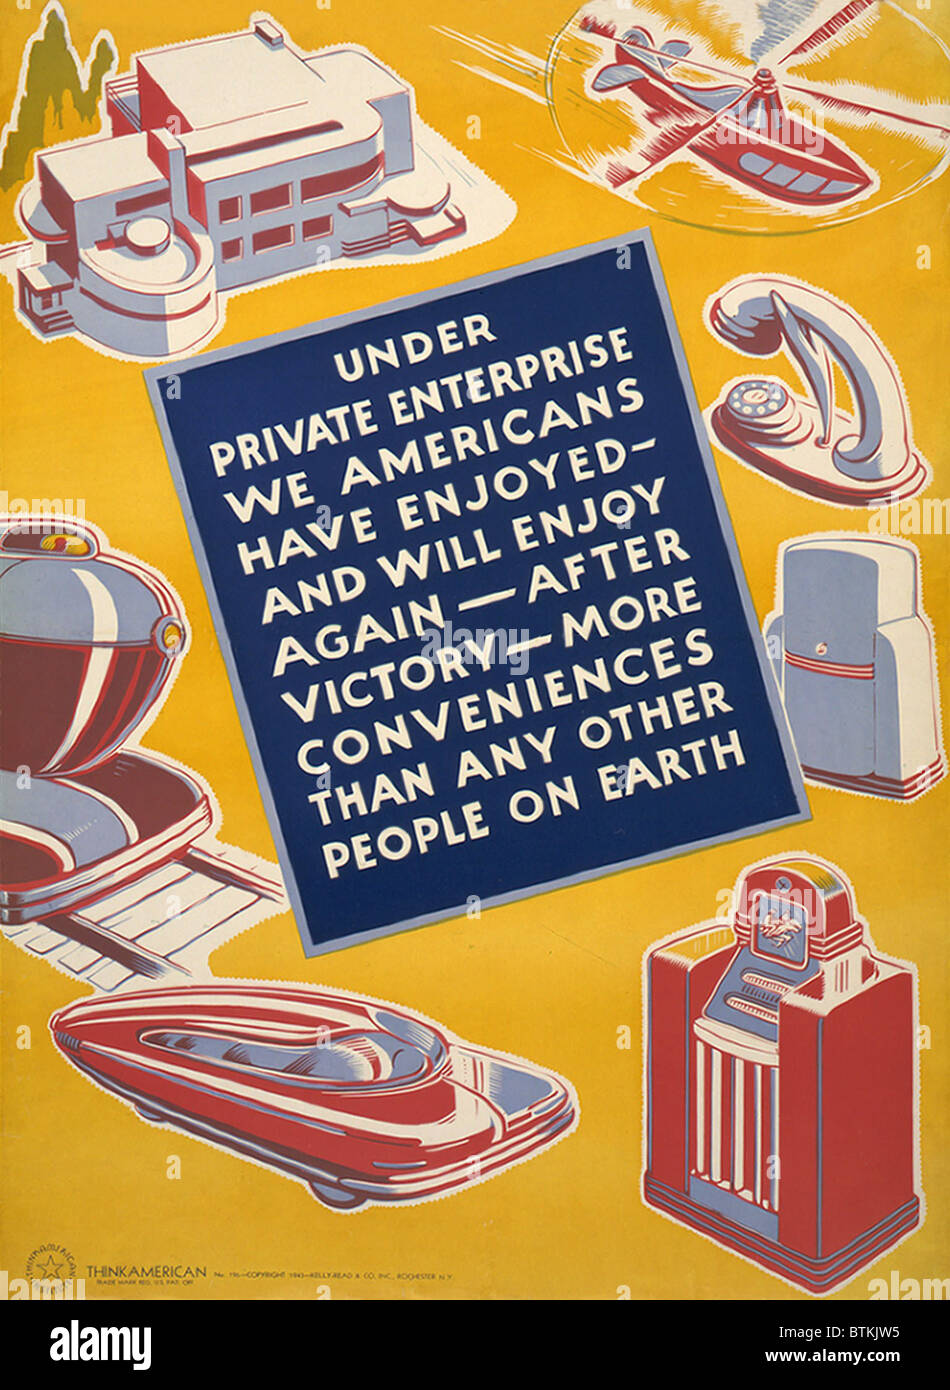 World War II poster reassuring Americans that victory will bring an improved standard of living and and bring back products unavailable during wartime rationing. Stock Photo